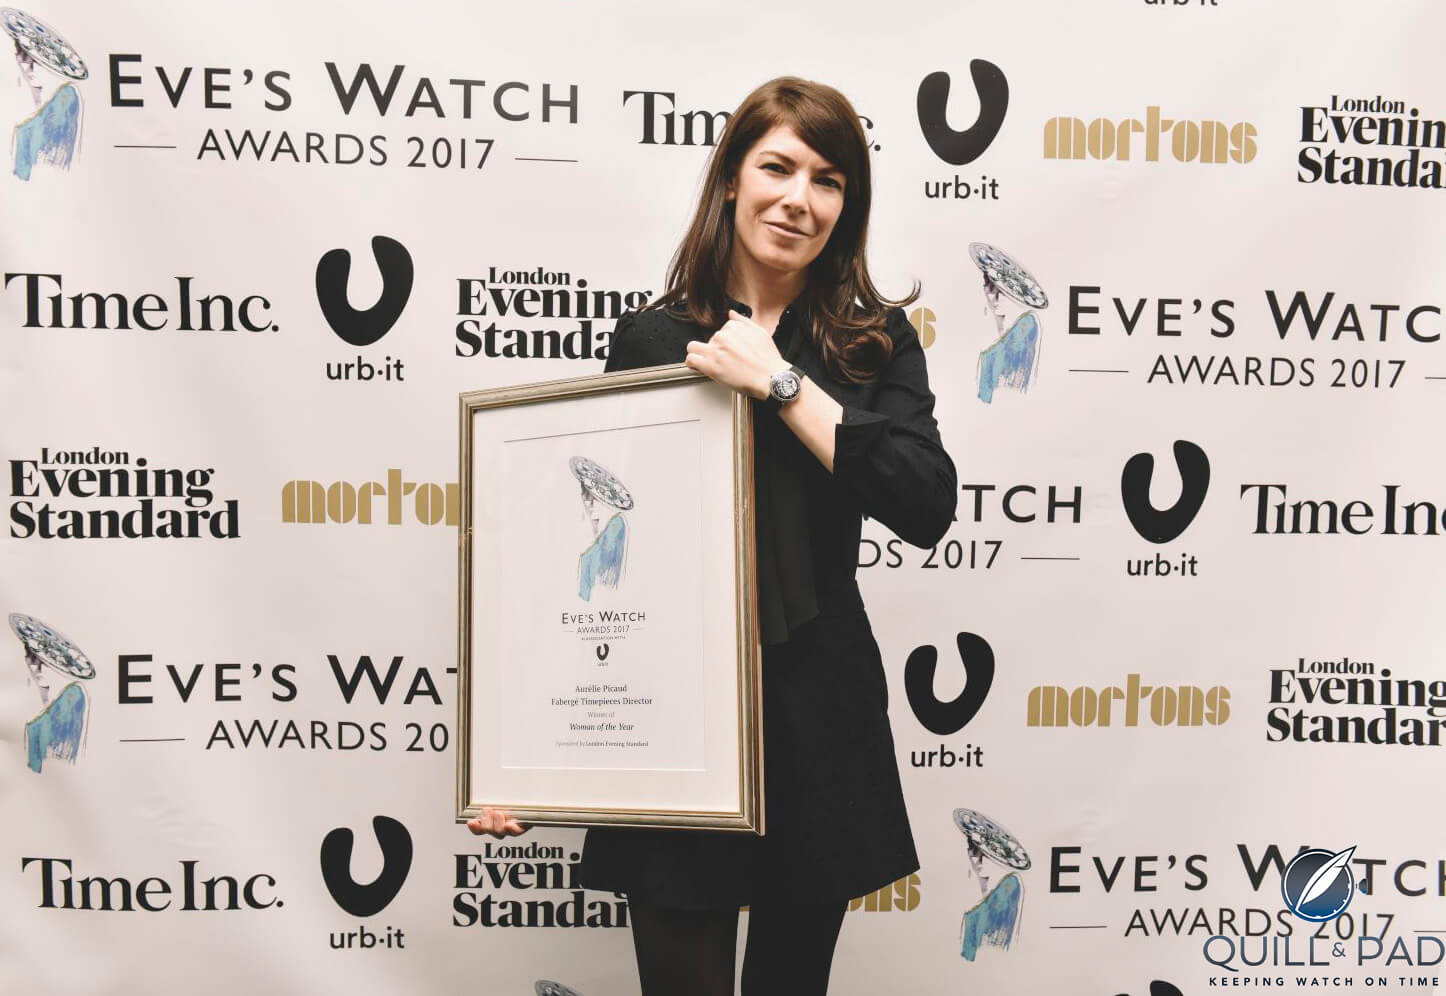 The 2017 Eve's Watch Woman of the Year: Aurélie Picaud, director of Fabergé Timepieces